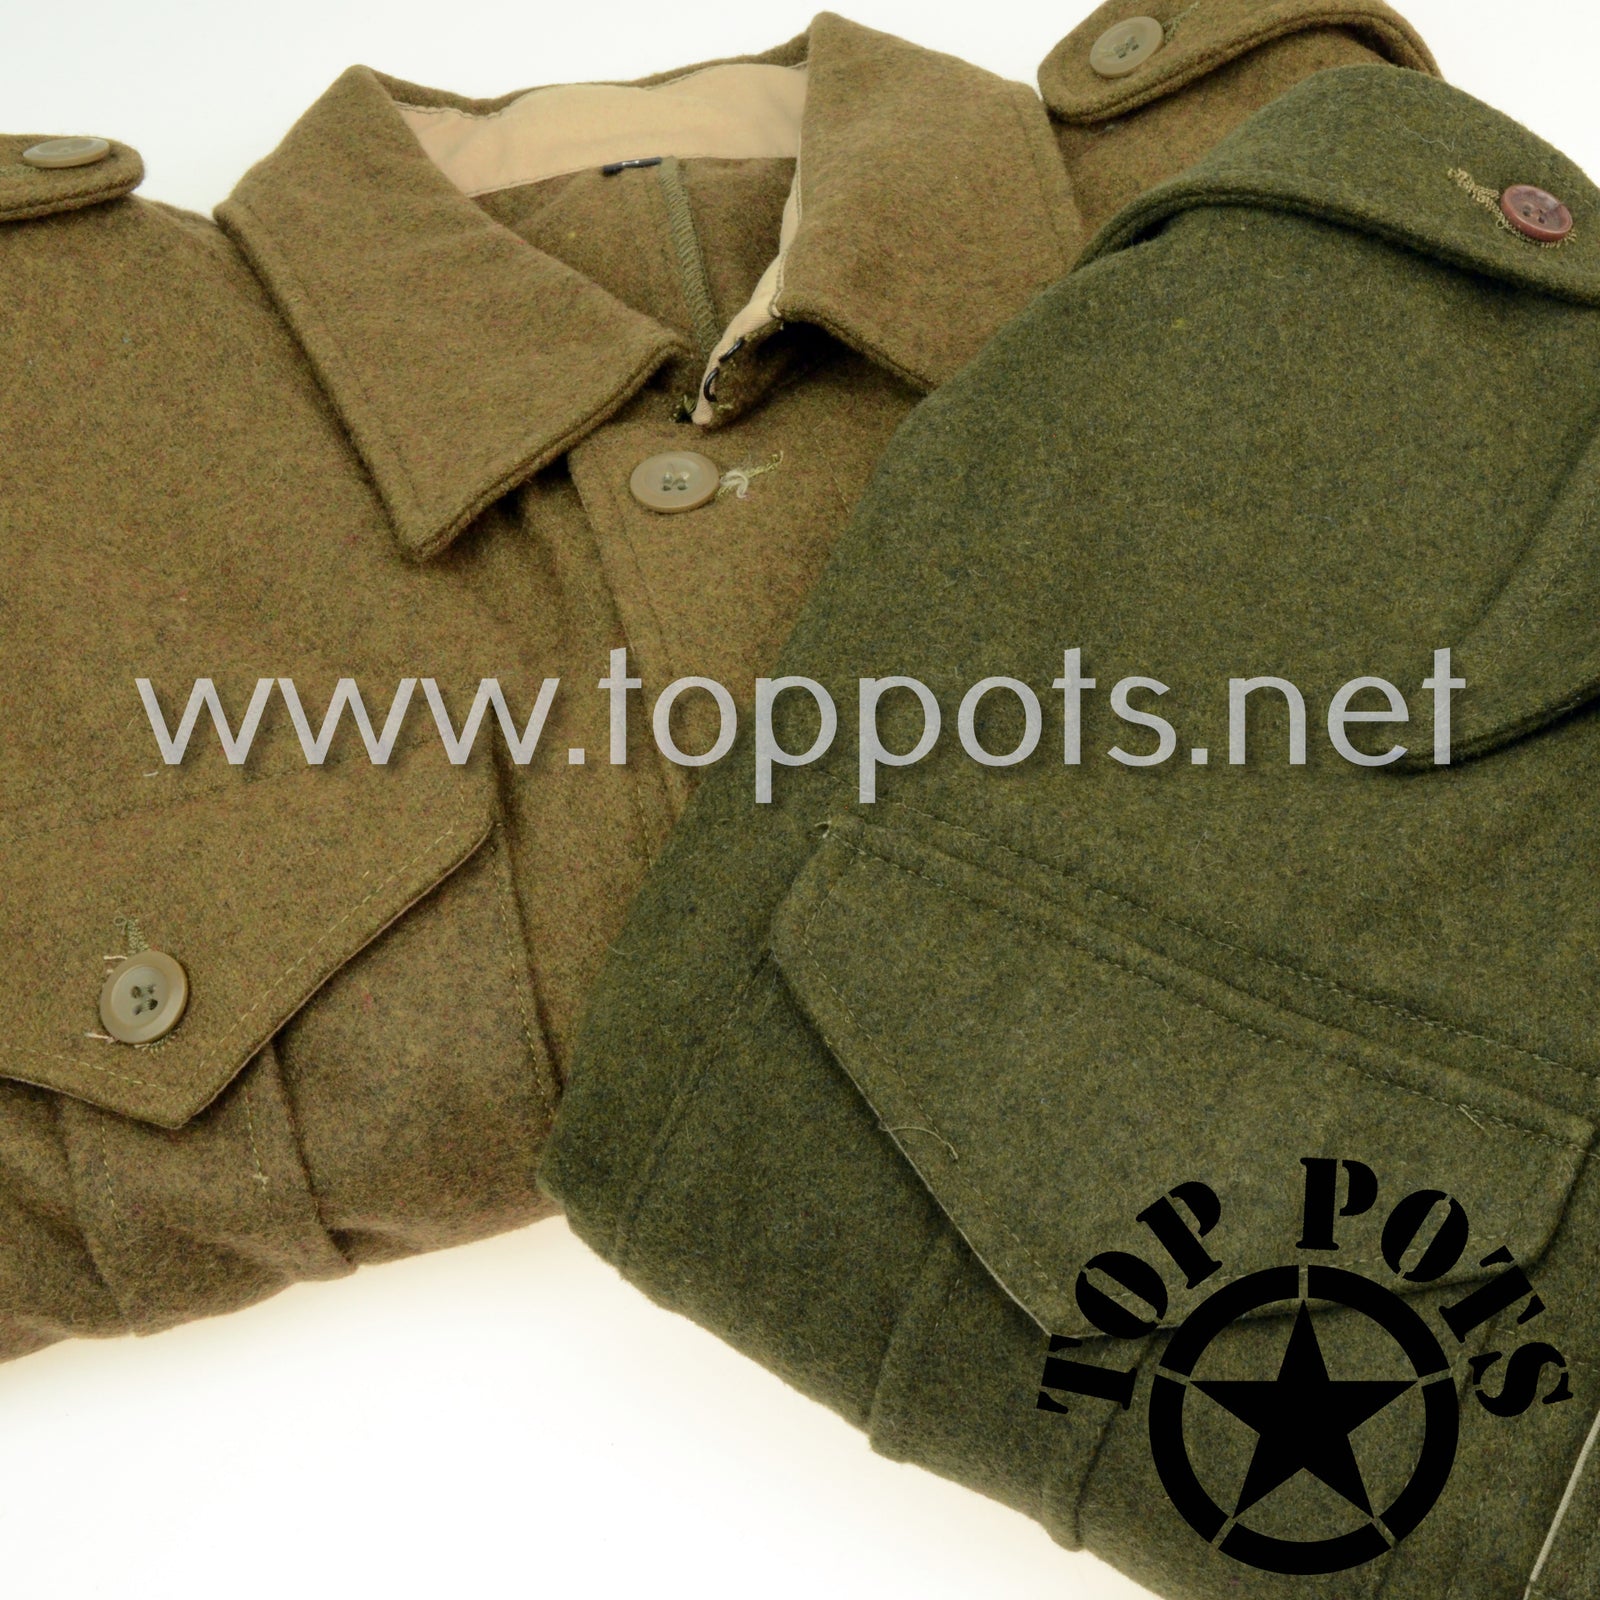 WWII US Army Reproduction M1942 Cotton Enlisted Paratrooper Combat Uni -  Top Pots - WWII US M-1 Helmets, Liners and Reproduction Uniform Sales